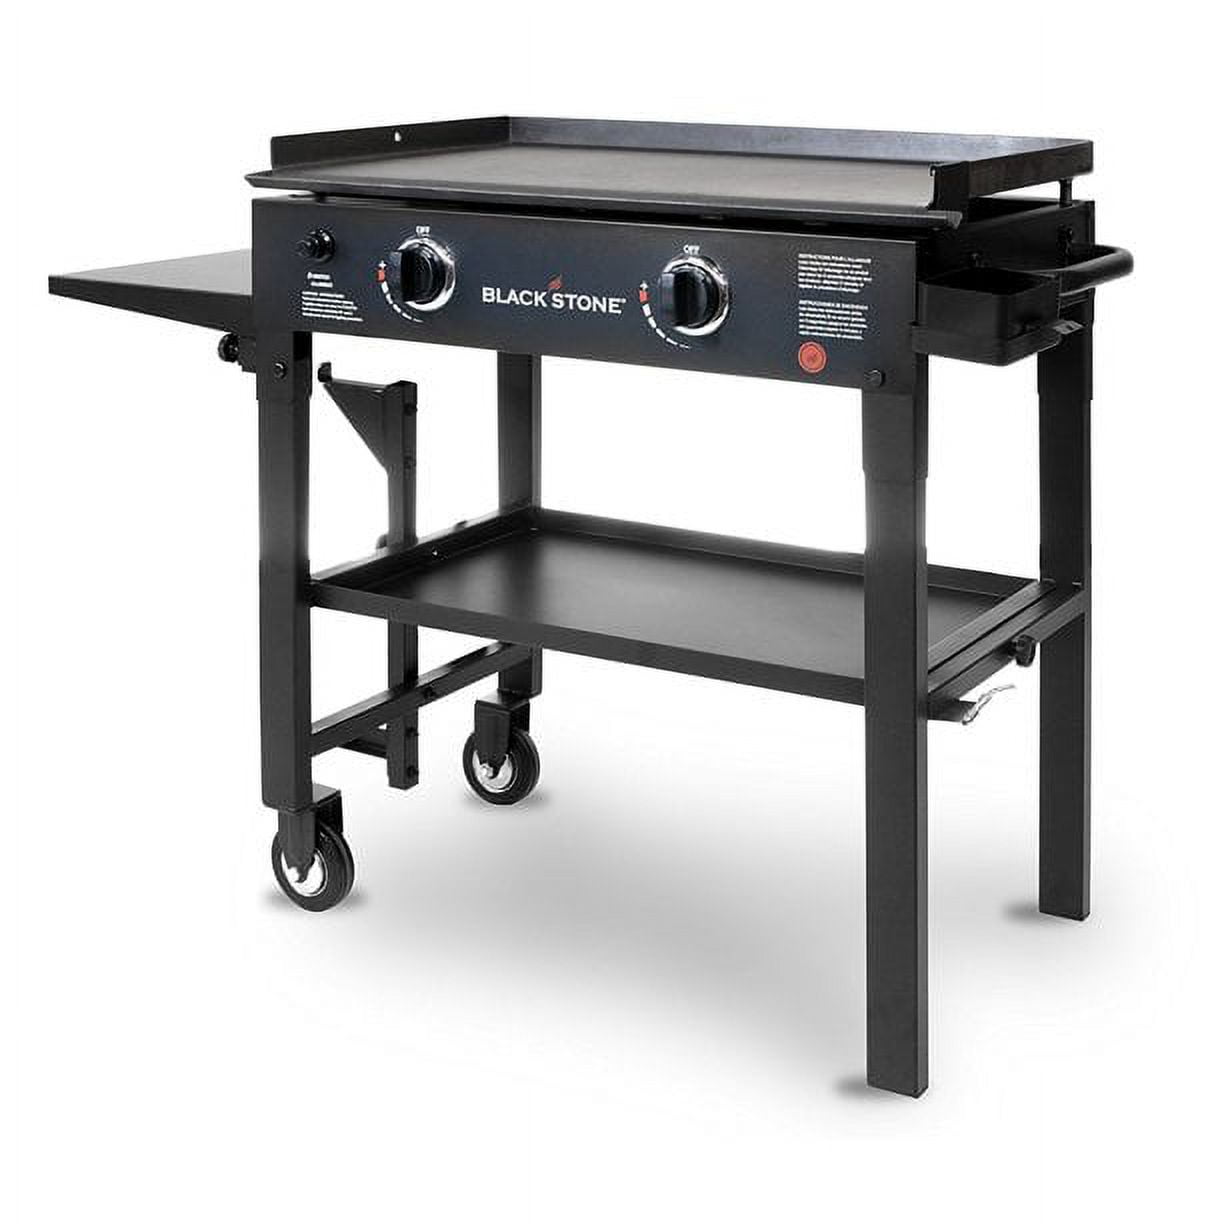 MFSTUDIO Flat-Top Grill, 2-Burner 20,000 BTU Outdoor Propane Griddle Grill  with Cast Iron Griddles Plate, Stainless Steel Cooking Rack and Lid, Black